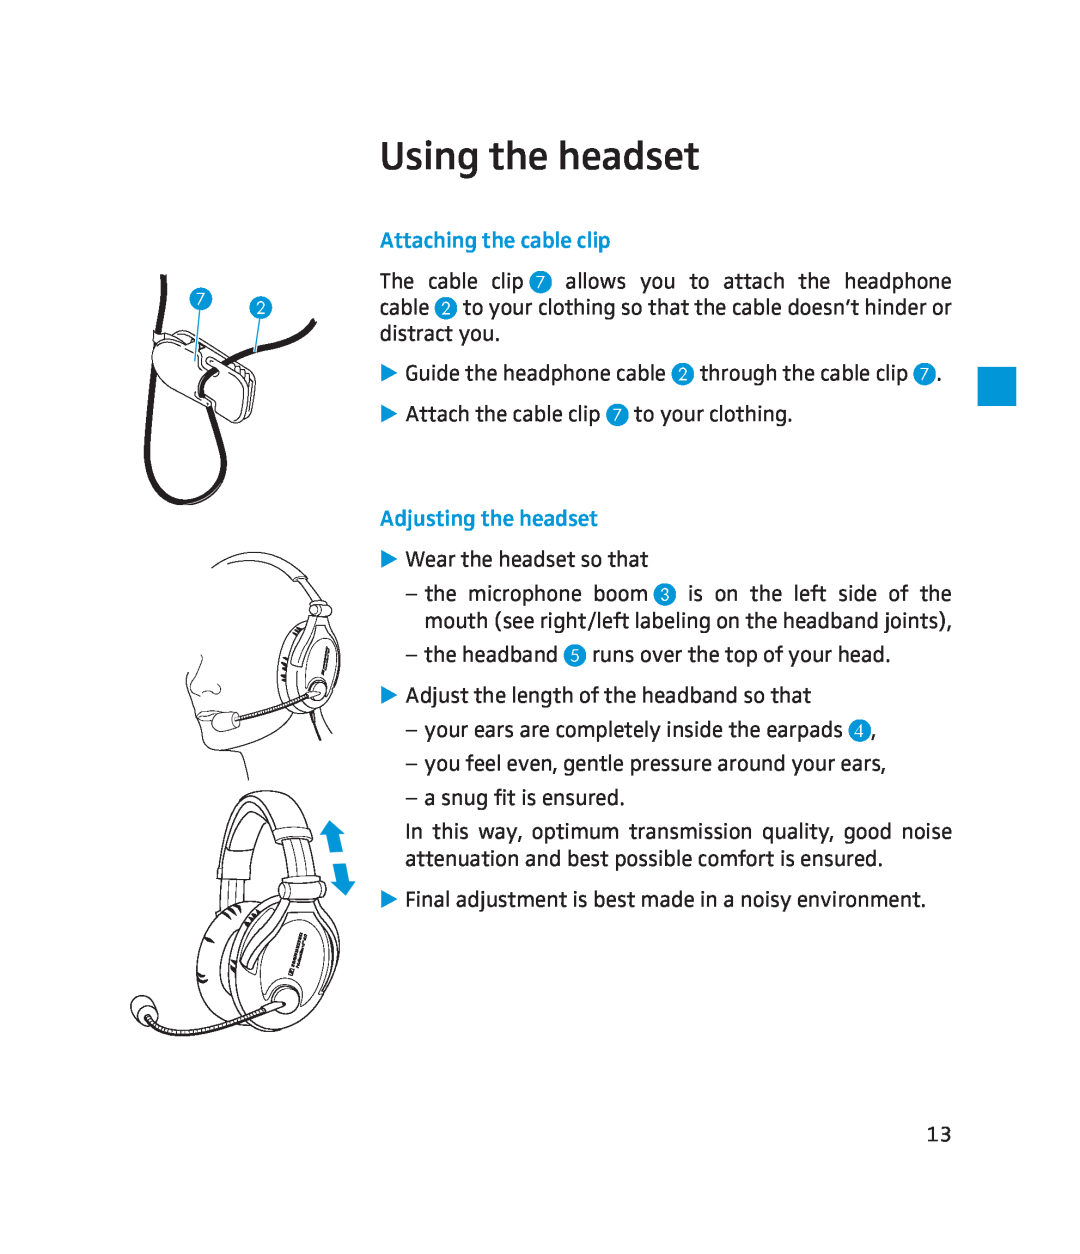 Sennheiser 250 instruction manual Using the headset, Attaching the cable clip, Adjusting the headset 